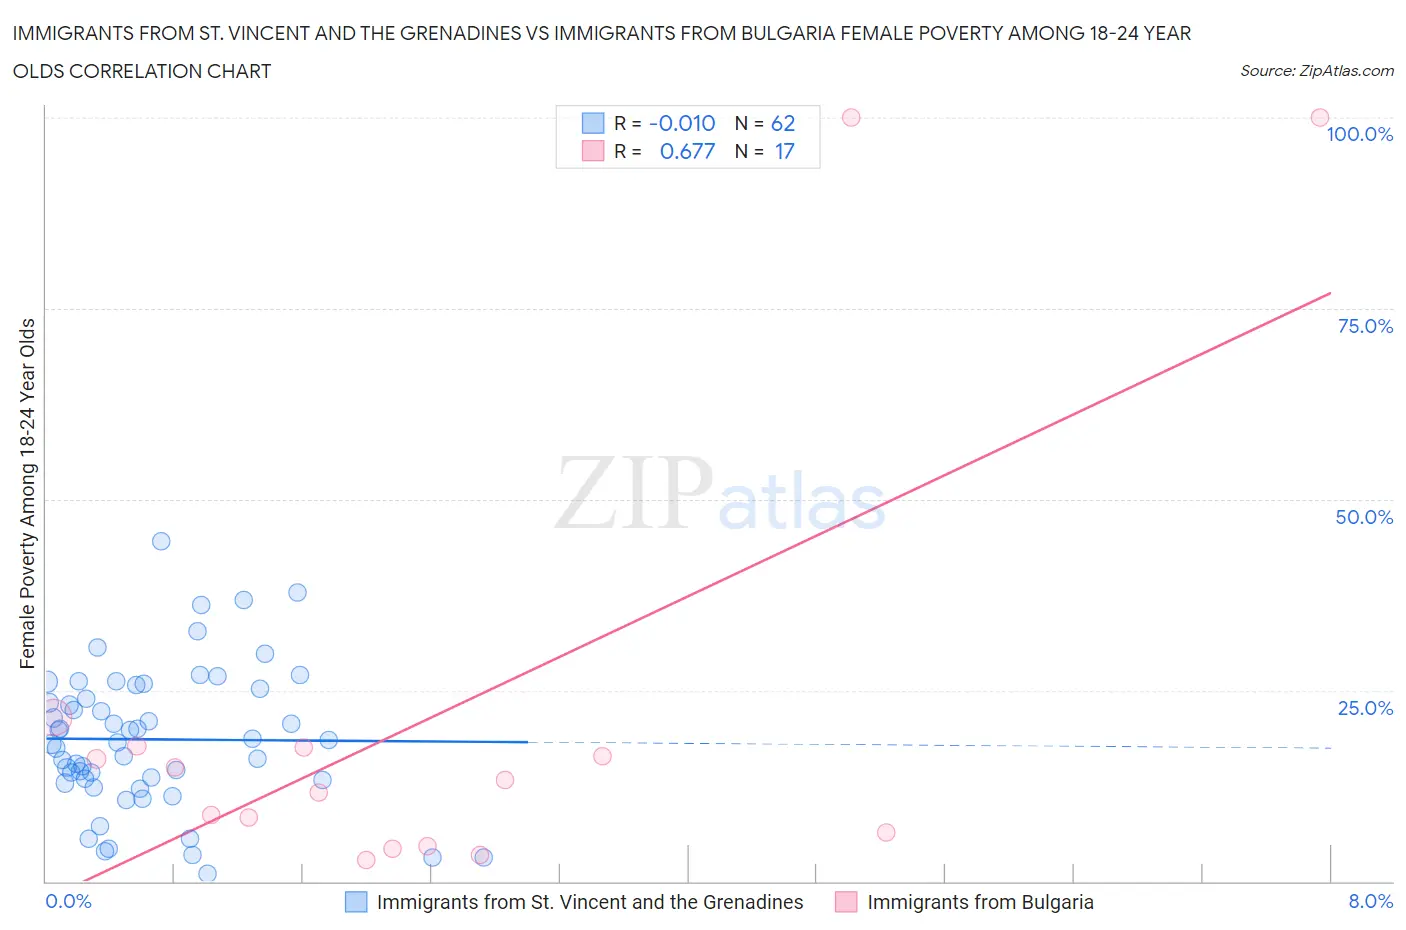 Immigrants from St. Vincent and the Grenadines vs Immigrants from Bulgaria Female Poverty Among 18-24 Year Olds